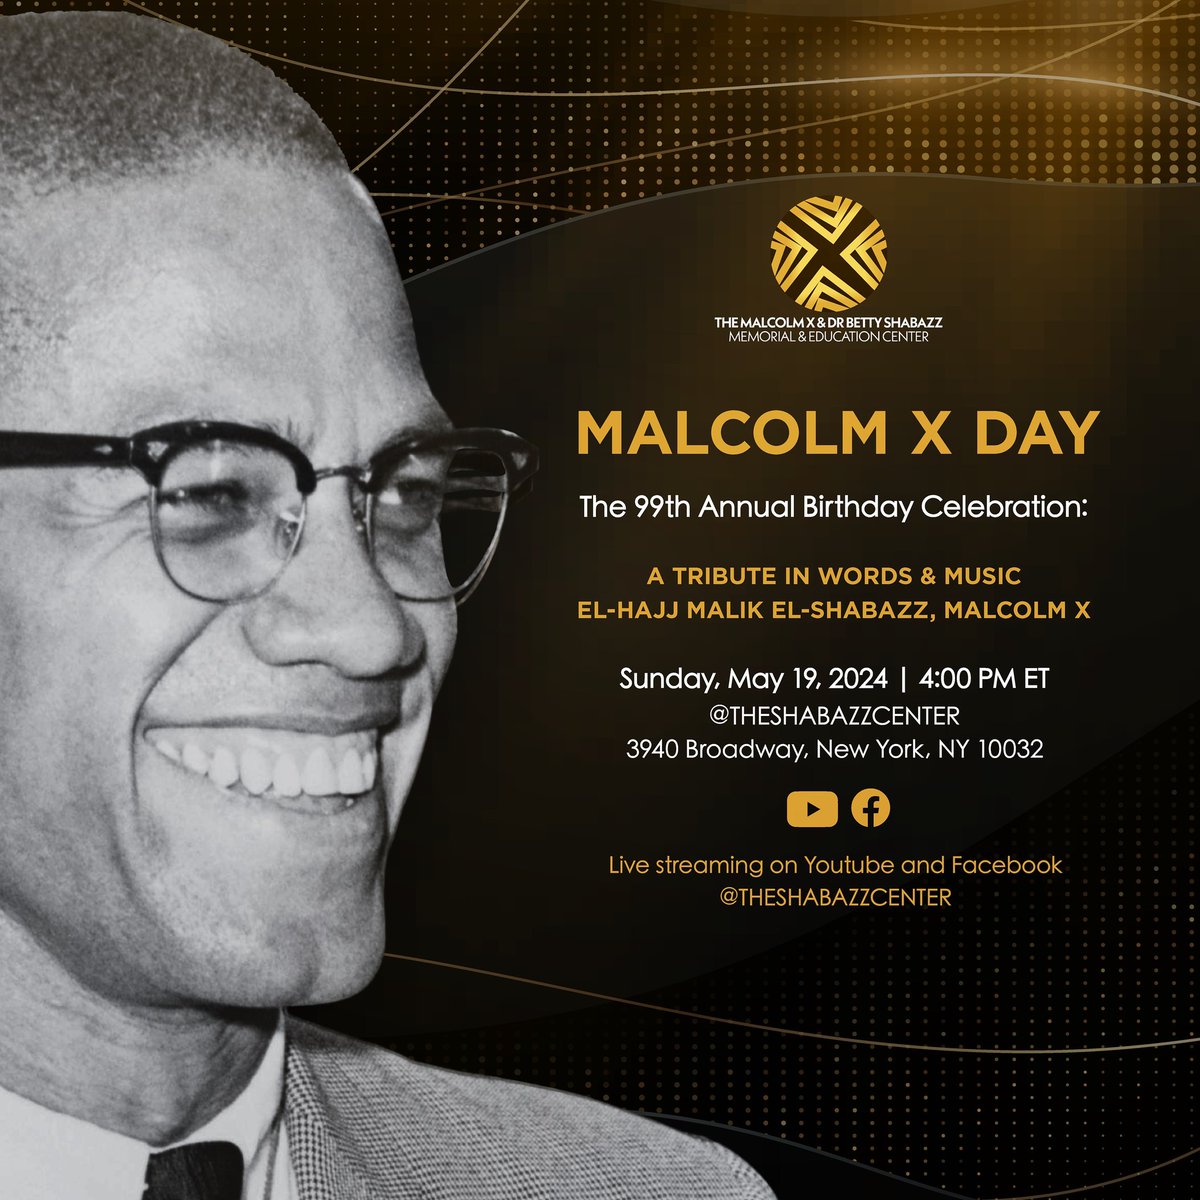 The Malcolm X & Dr. Betty Shabazz Memorial and Educational Center invites you to join us for our annual tribute to Malcolm X in Words and Music on Sunday, May 19th, 2024 on what would have been the 99th birthday of El-Hajj Malik El-Shabazz. RSVP & join us eventbrite.com/e/malcolm-x-da…